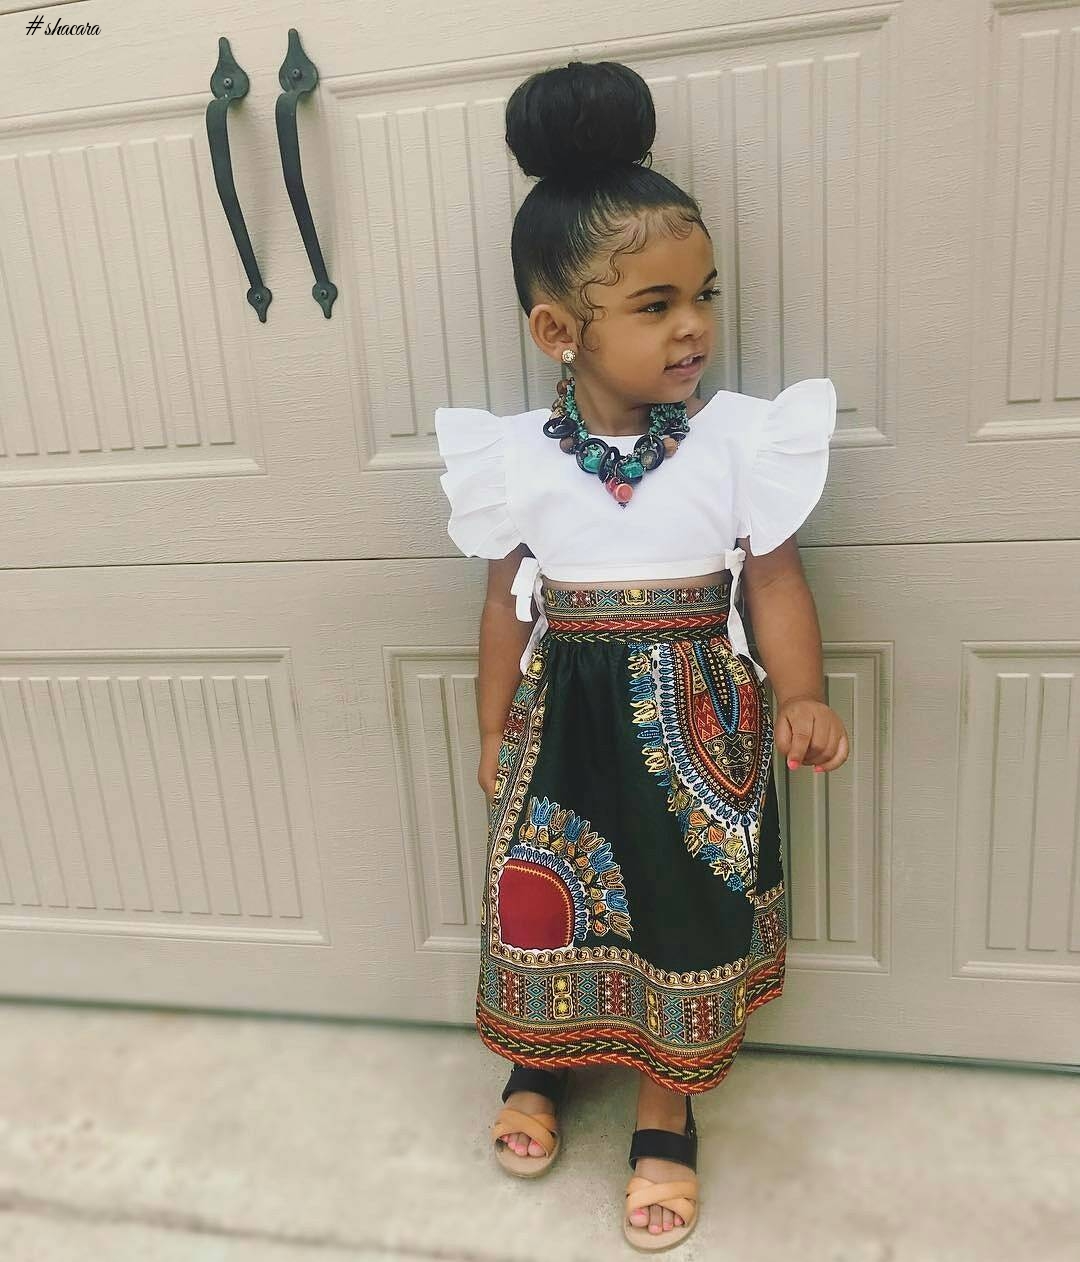 THE ANKARA STYLES YOUR BABY GIRL WOULD FALL FOR